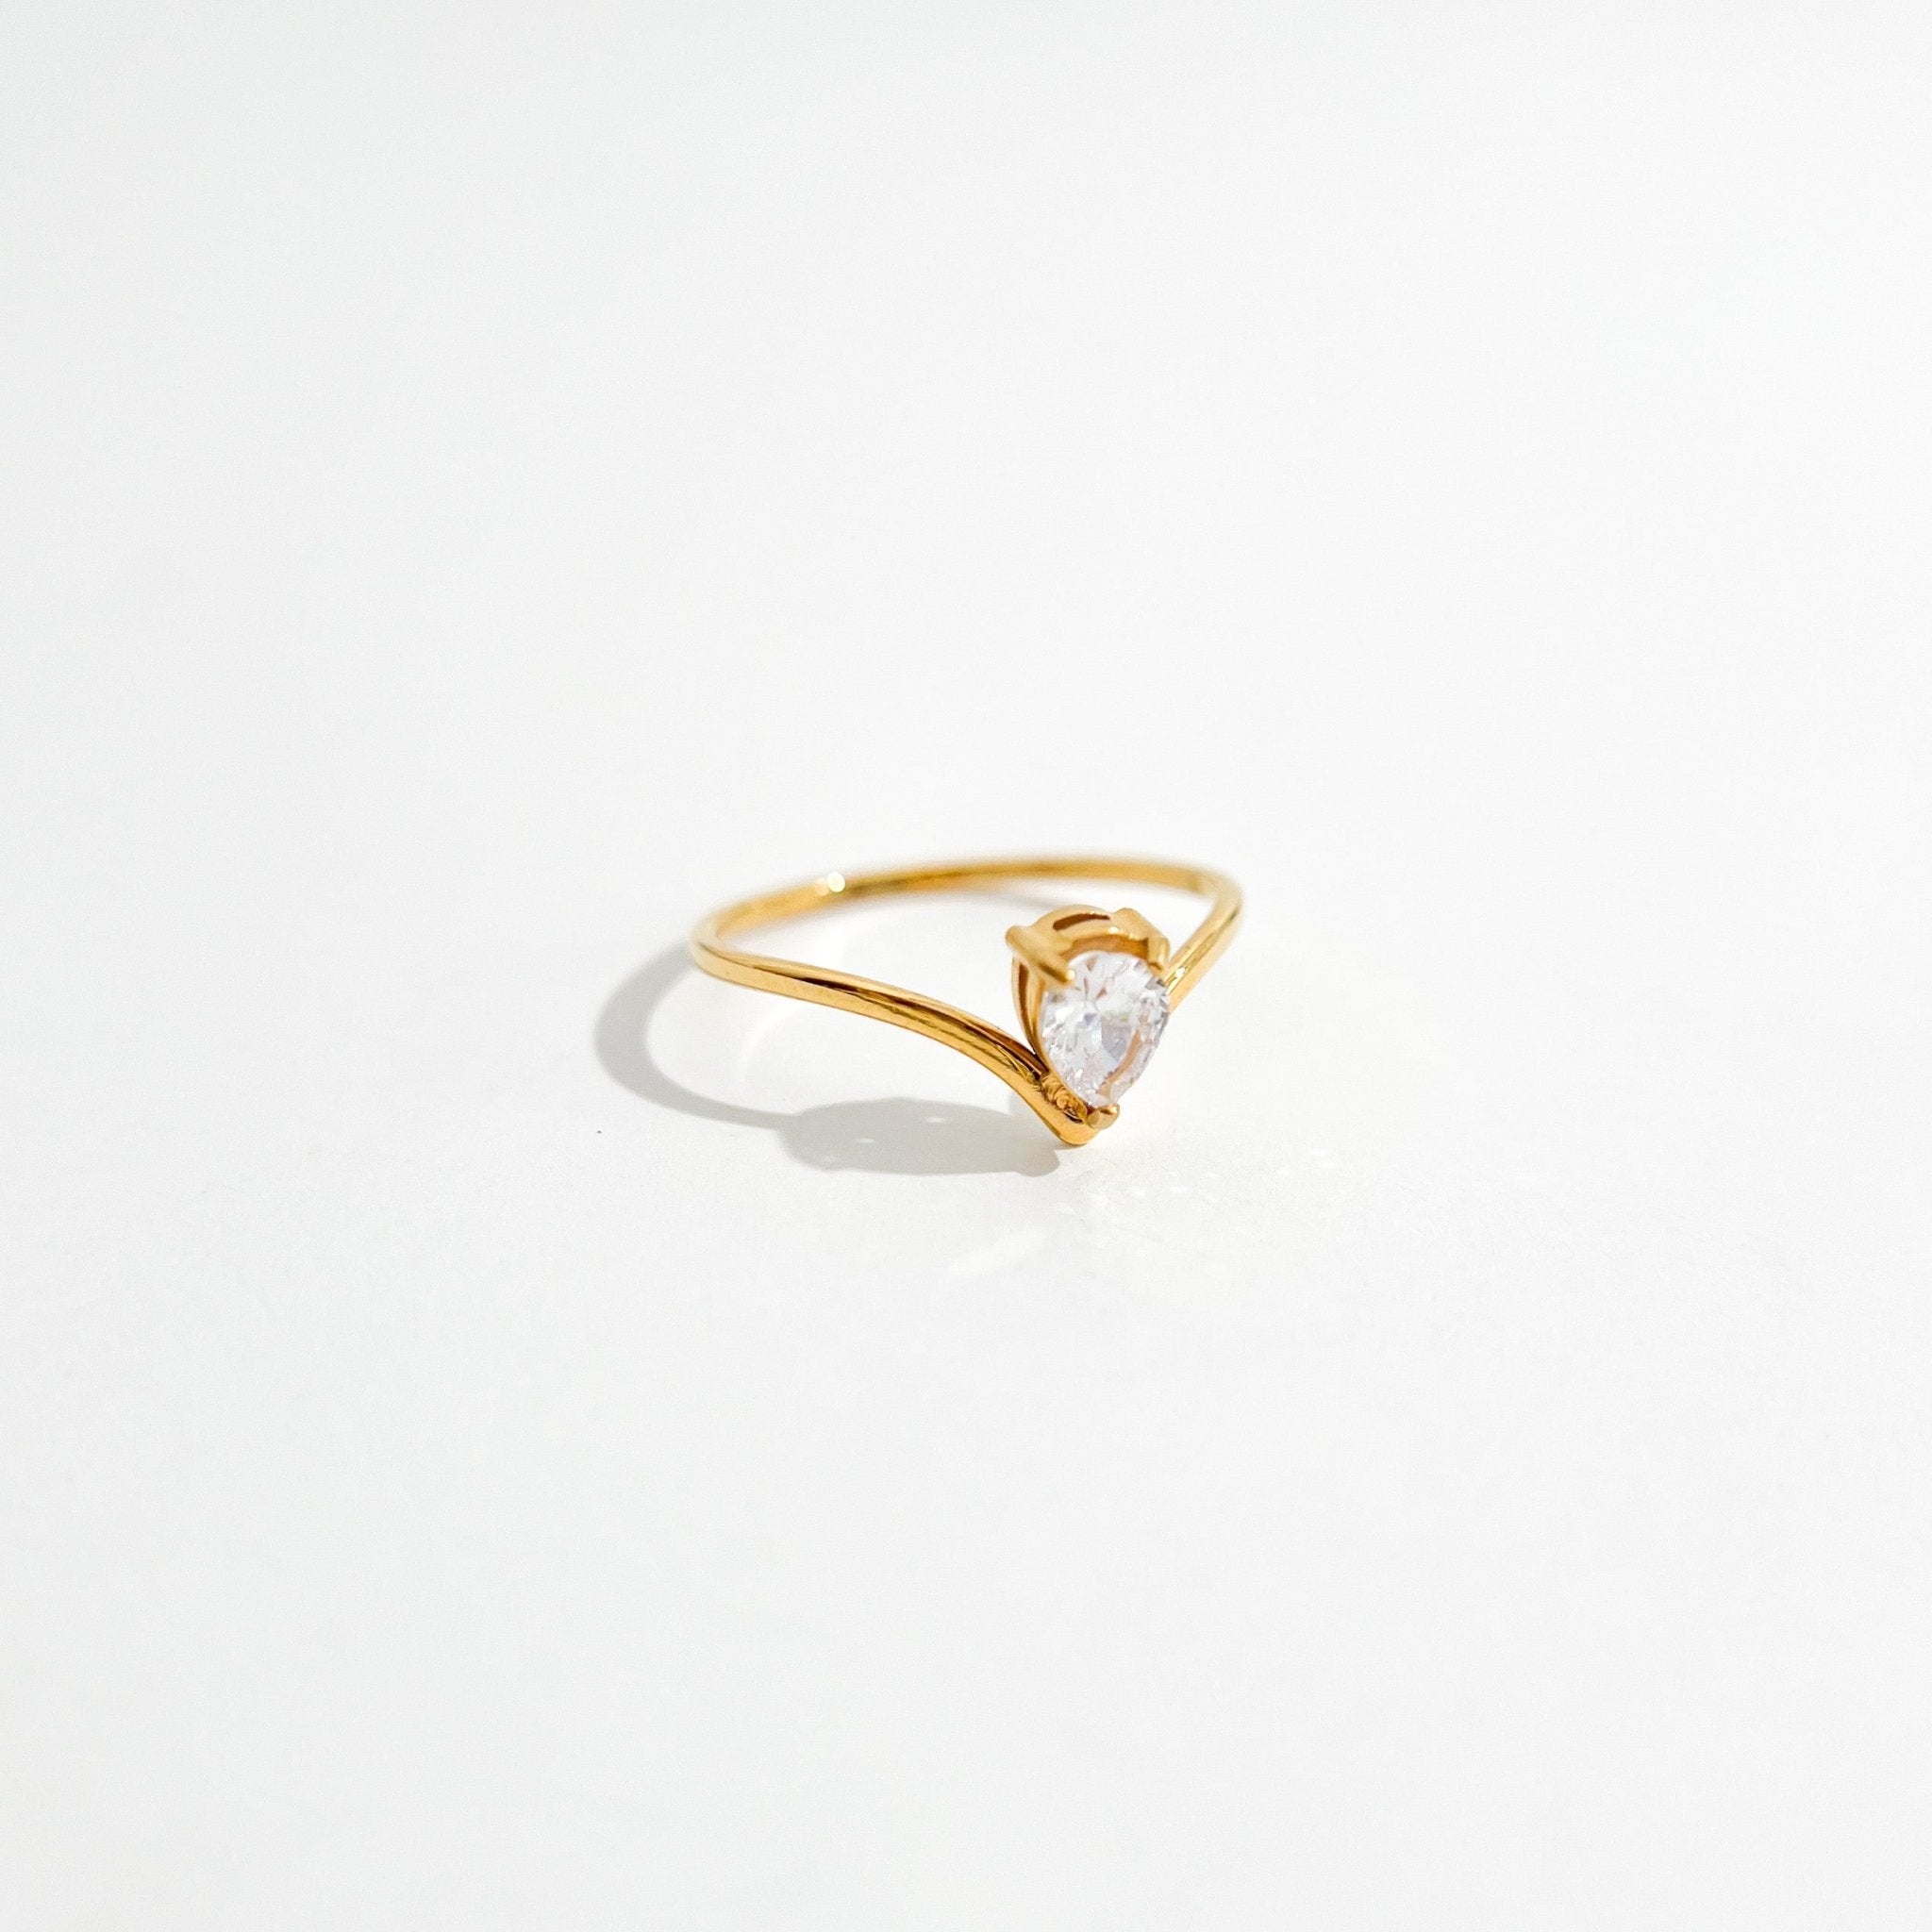 Tear Drop Gem Ring in Gold - Flaire & Co.